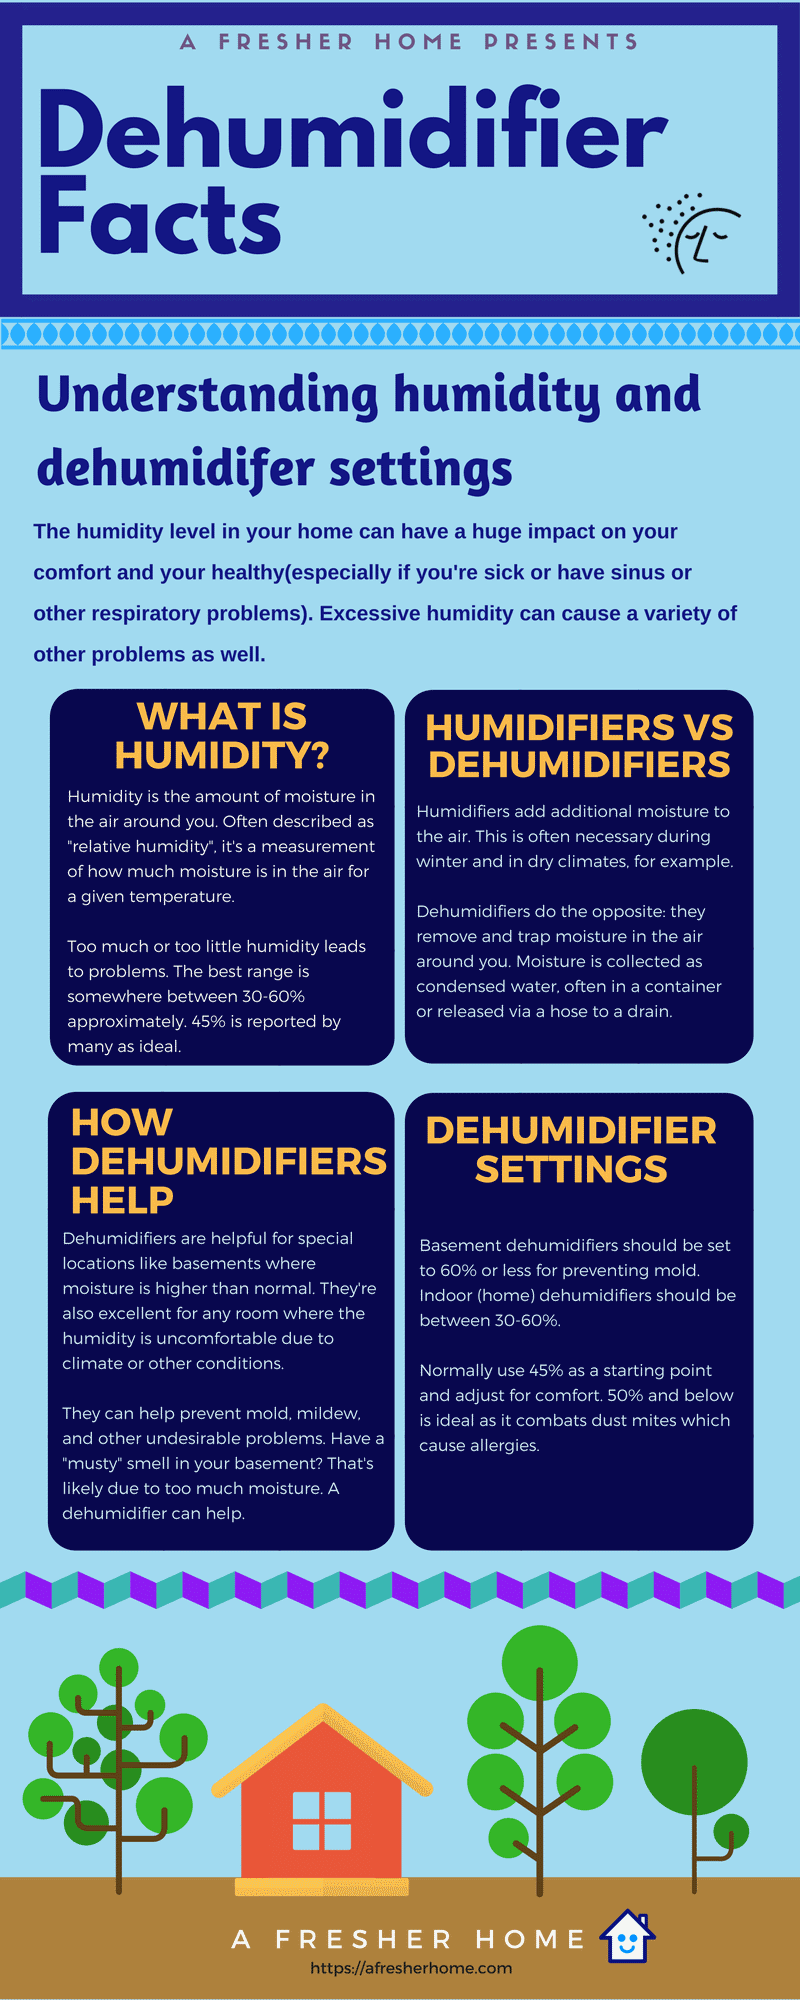 Infographic - what humidity should I set my dehumidifier to